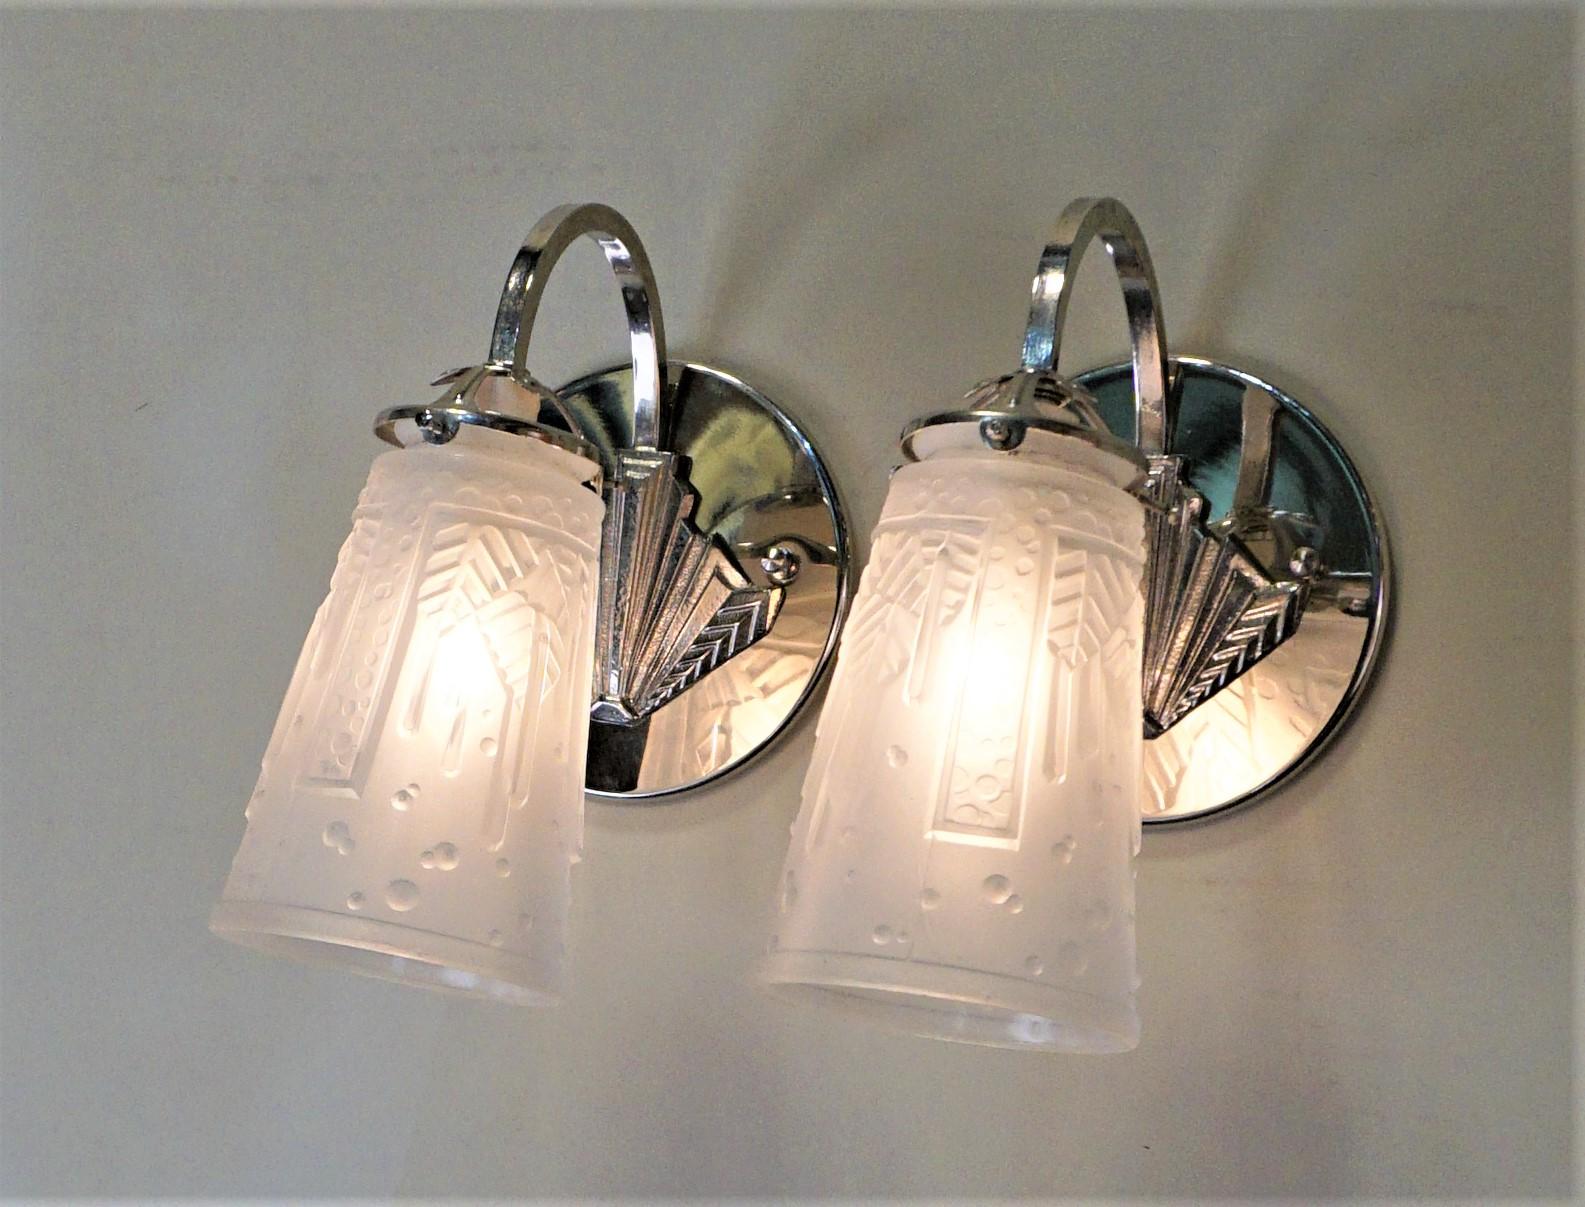 French Art Deco wall sconce wit geometric glass and nickel on bronze frame.
The back plate is 5